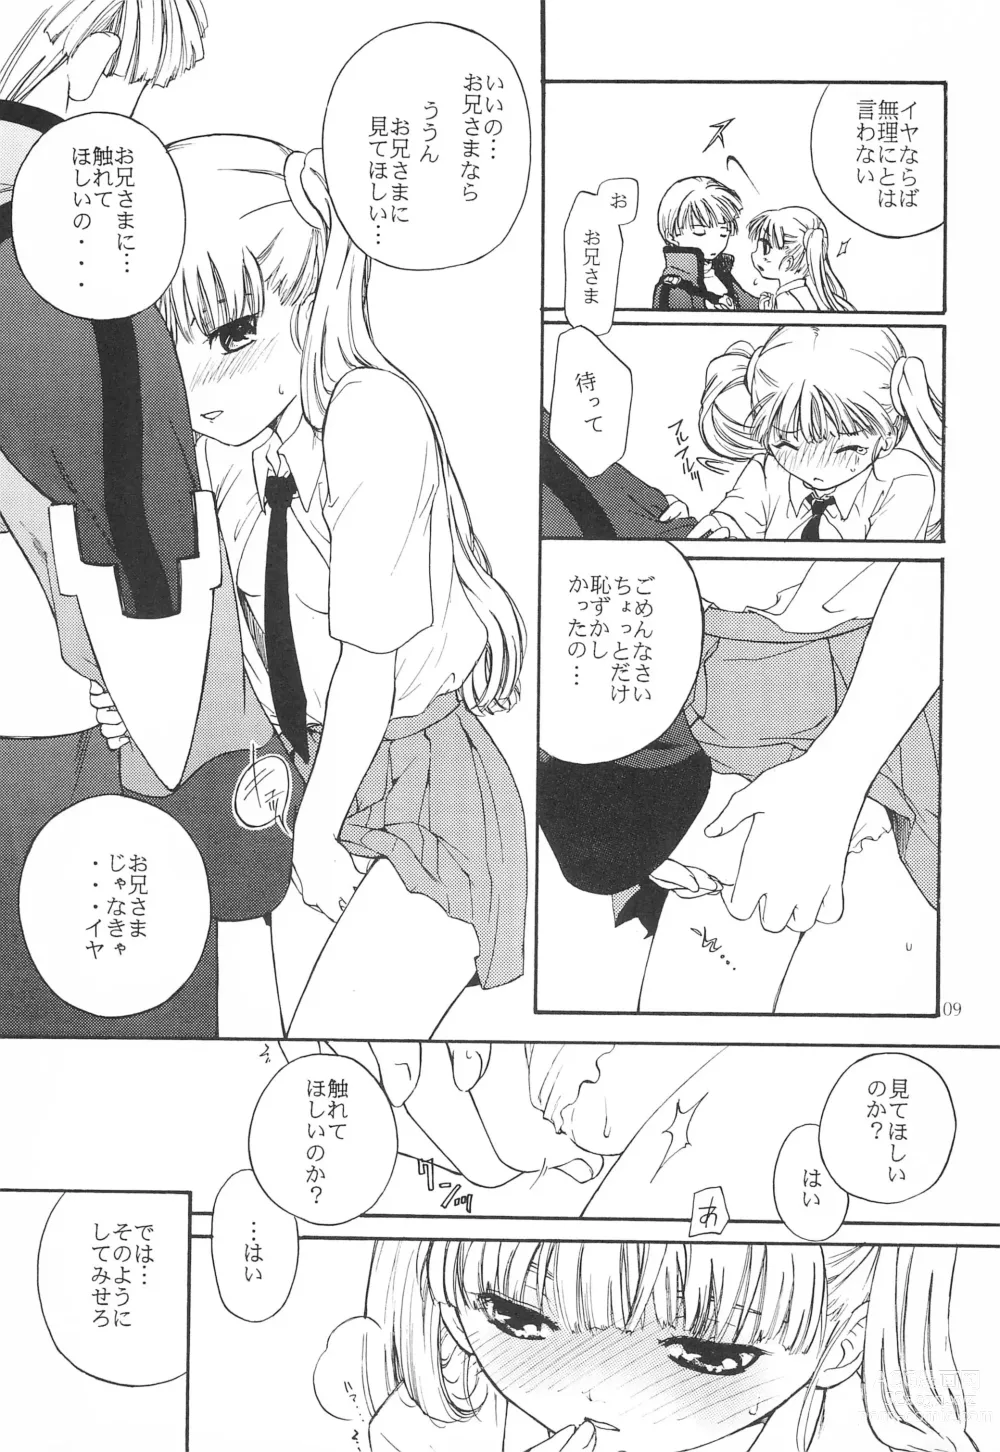 Page 9 of doujinshi Sweets home